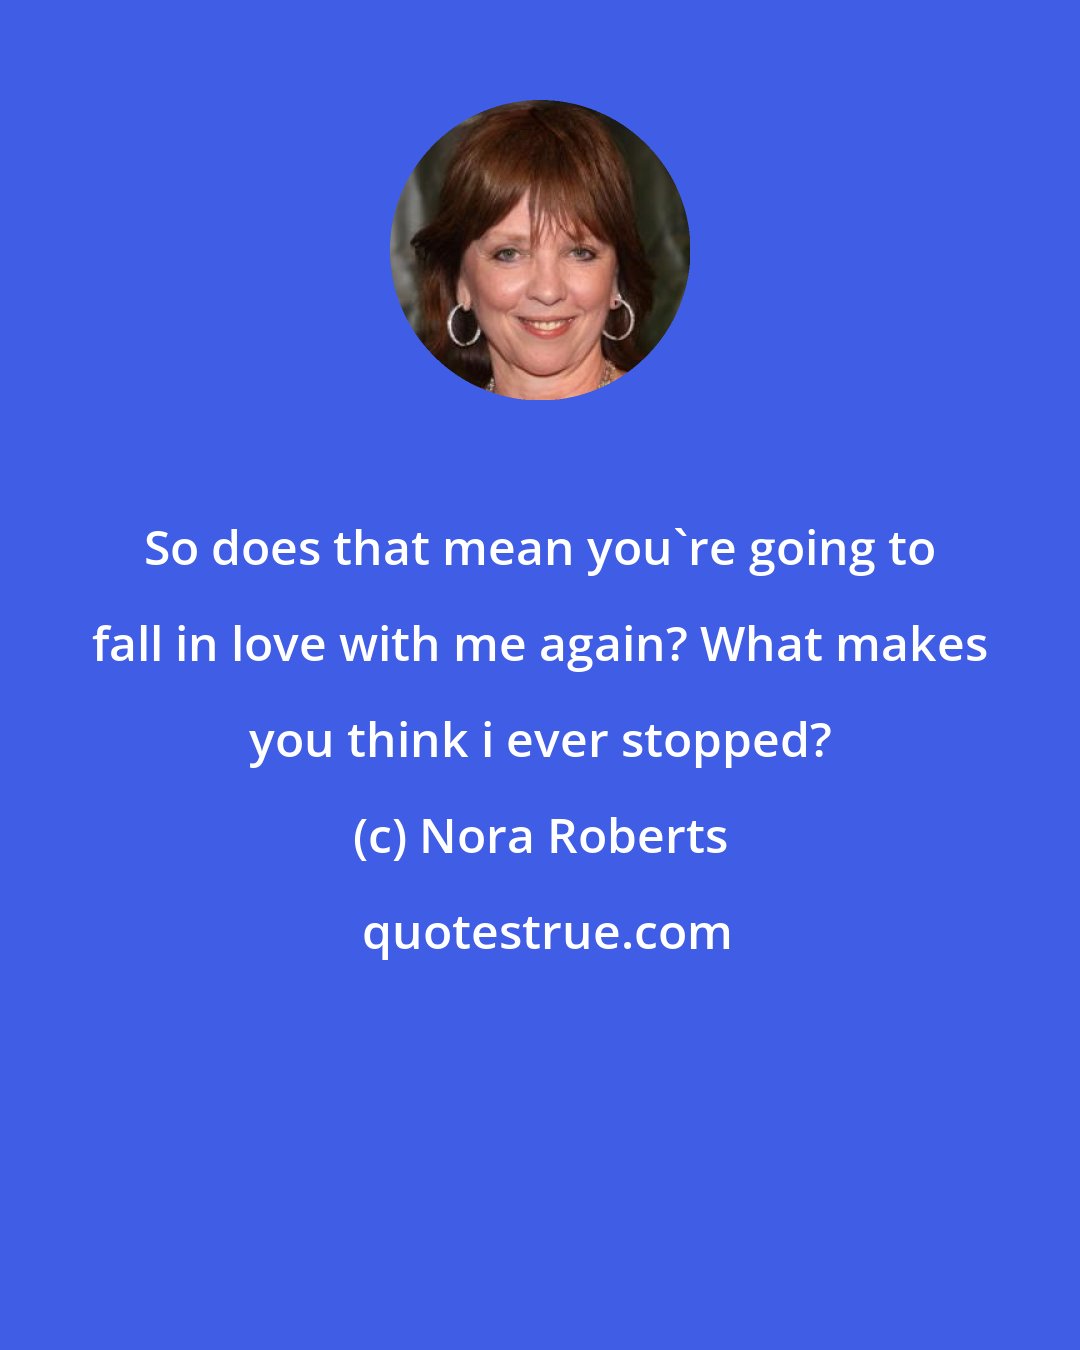 Nora Roberts: So does that mean you're going to fall in love with me again? What makes you think i ever stopped?